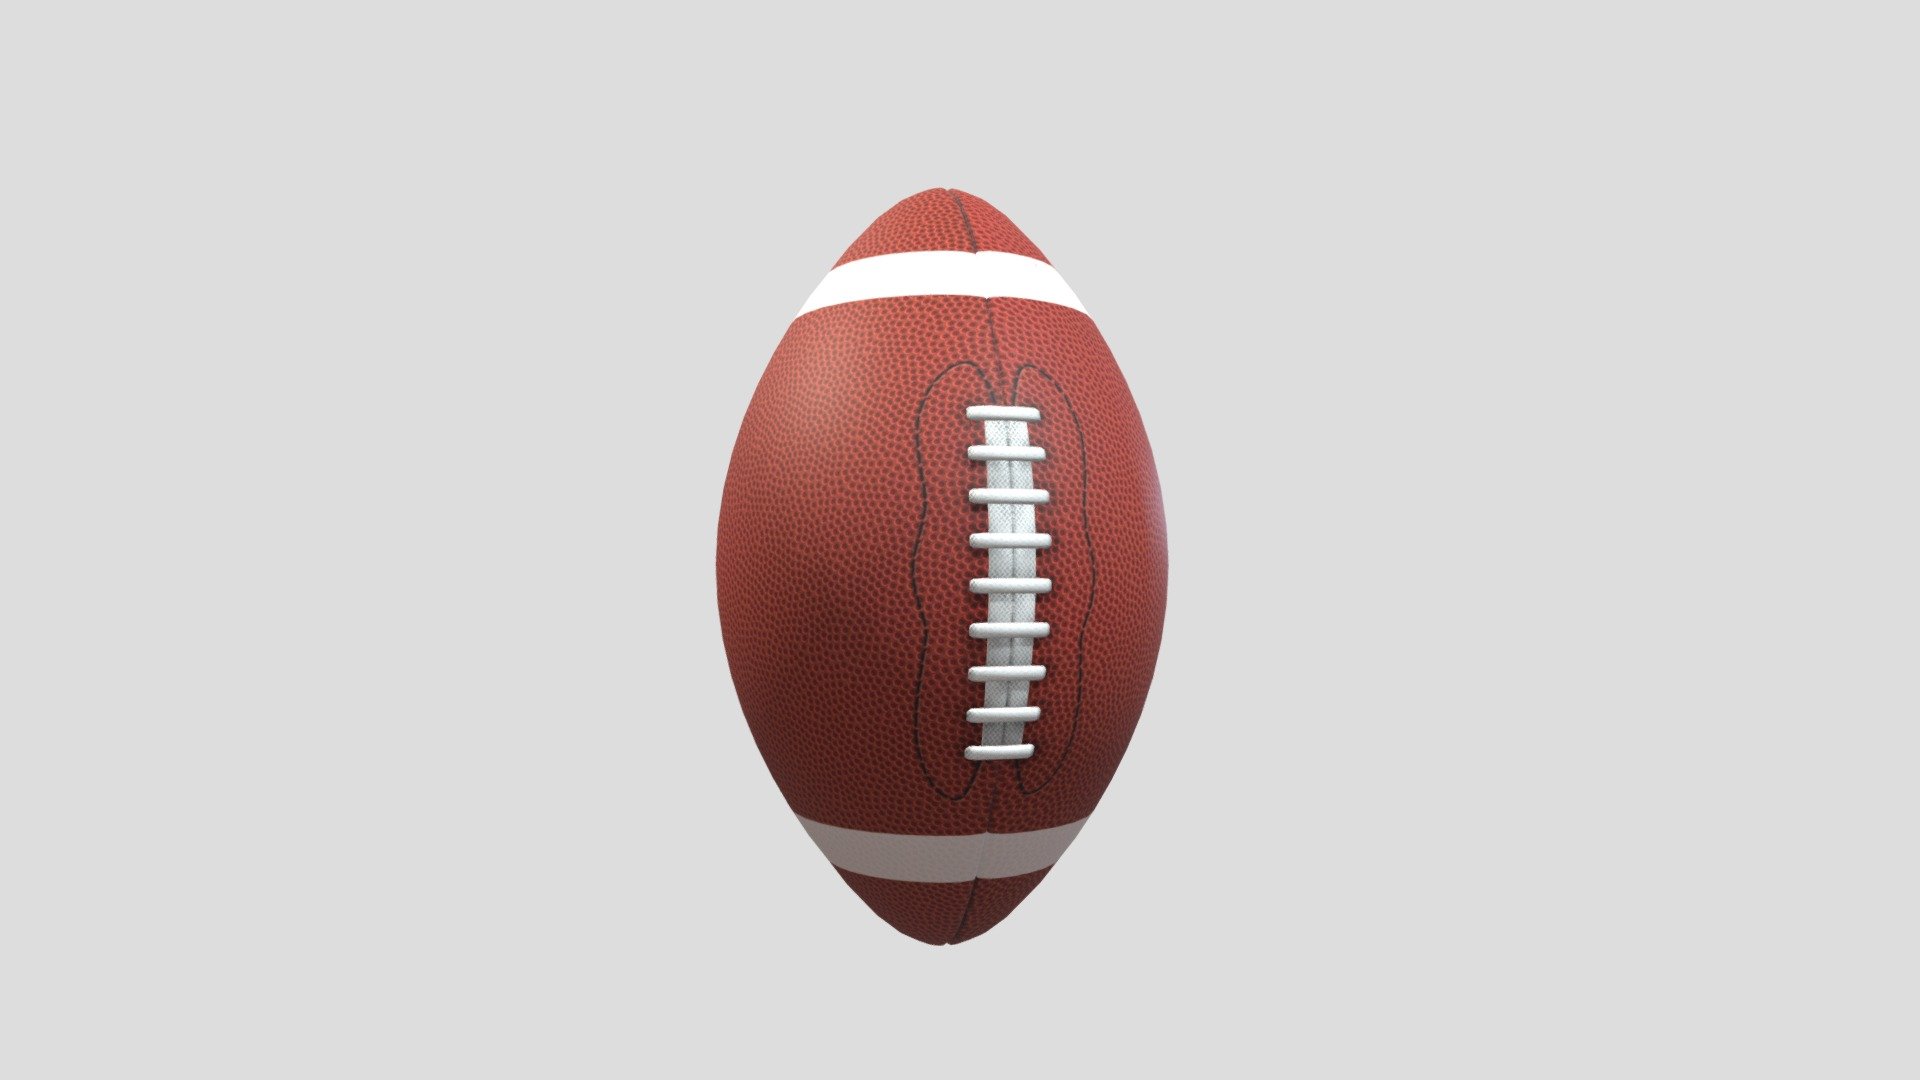 This is a model of a football. Subscribe to marco_18 on Snapchat for more. 
Link to Snapchat Lens,
Link to Snapchat Lens #2,
Link to appearance in Nickelodeon’s Unfiltered: Super Bowl Edition pregame segment 3d model